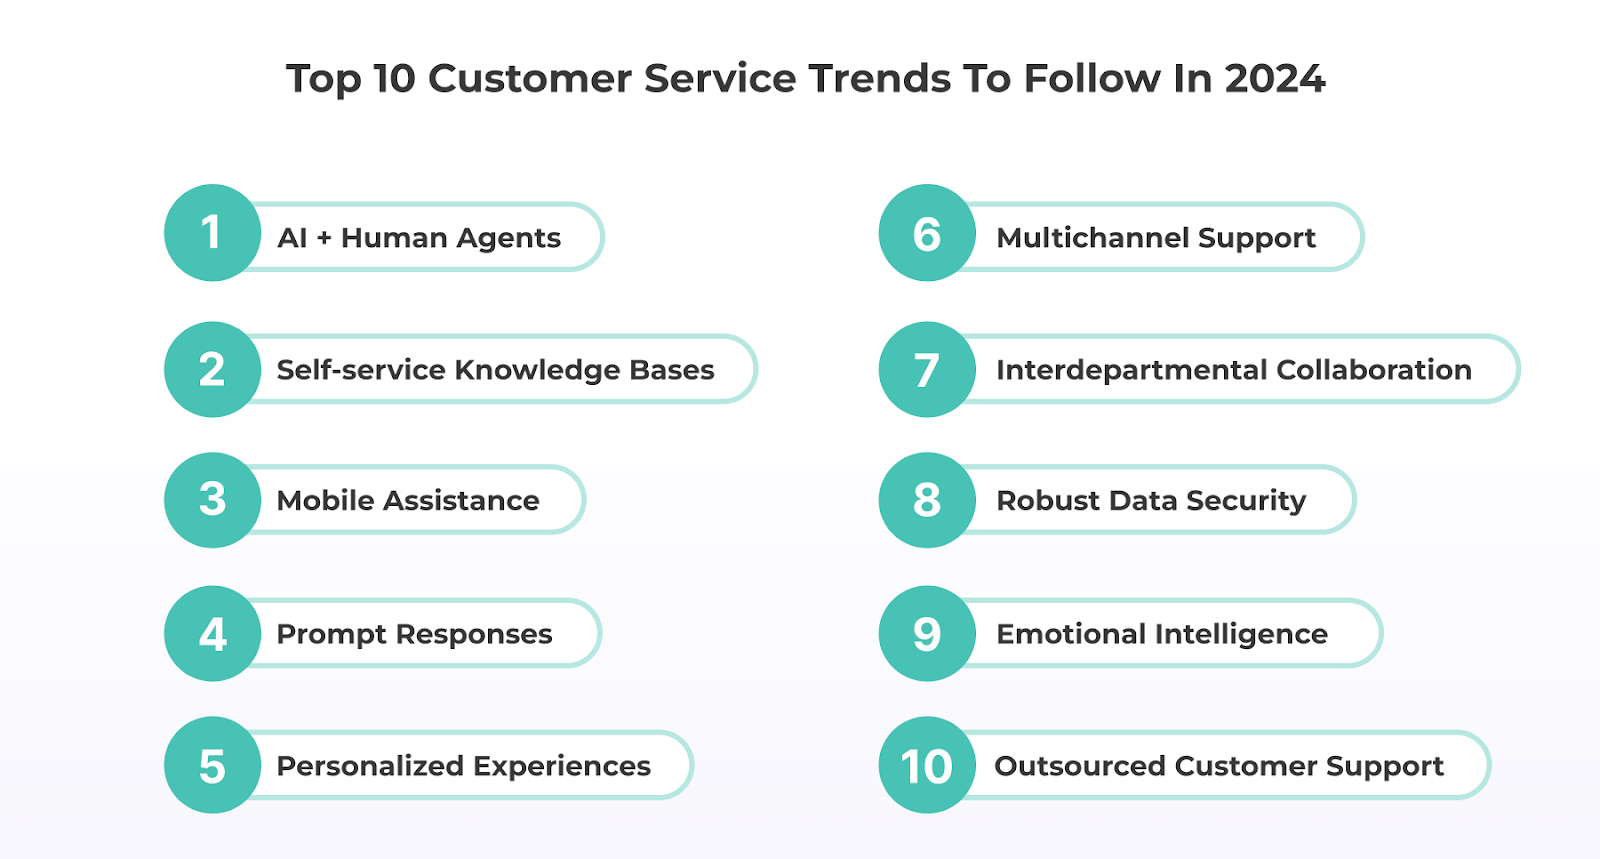 Top 10 Customer Service Trends to Follow in 2024